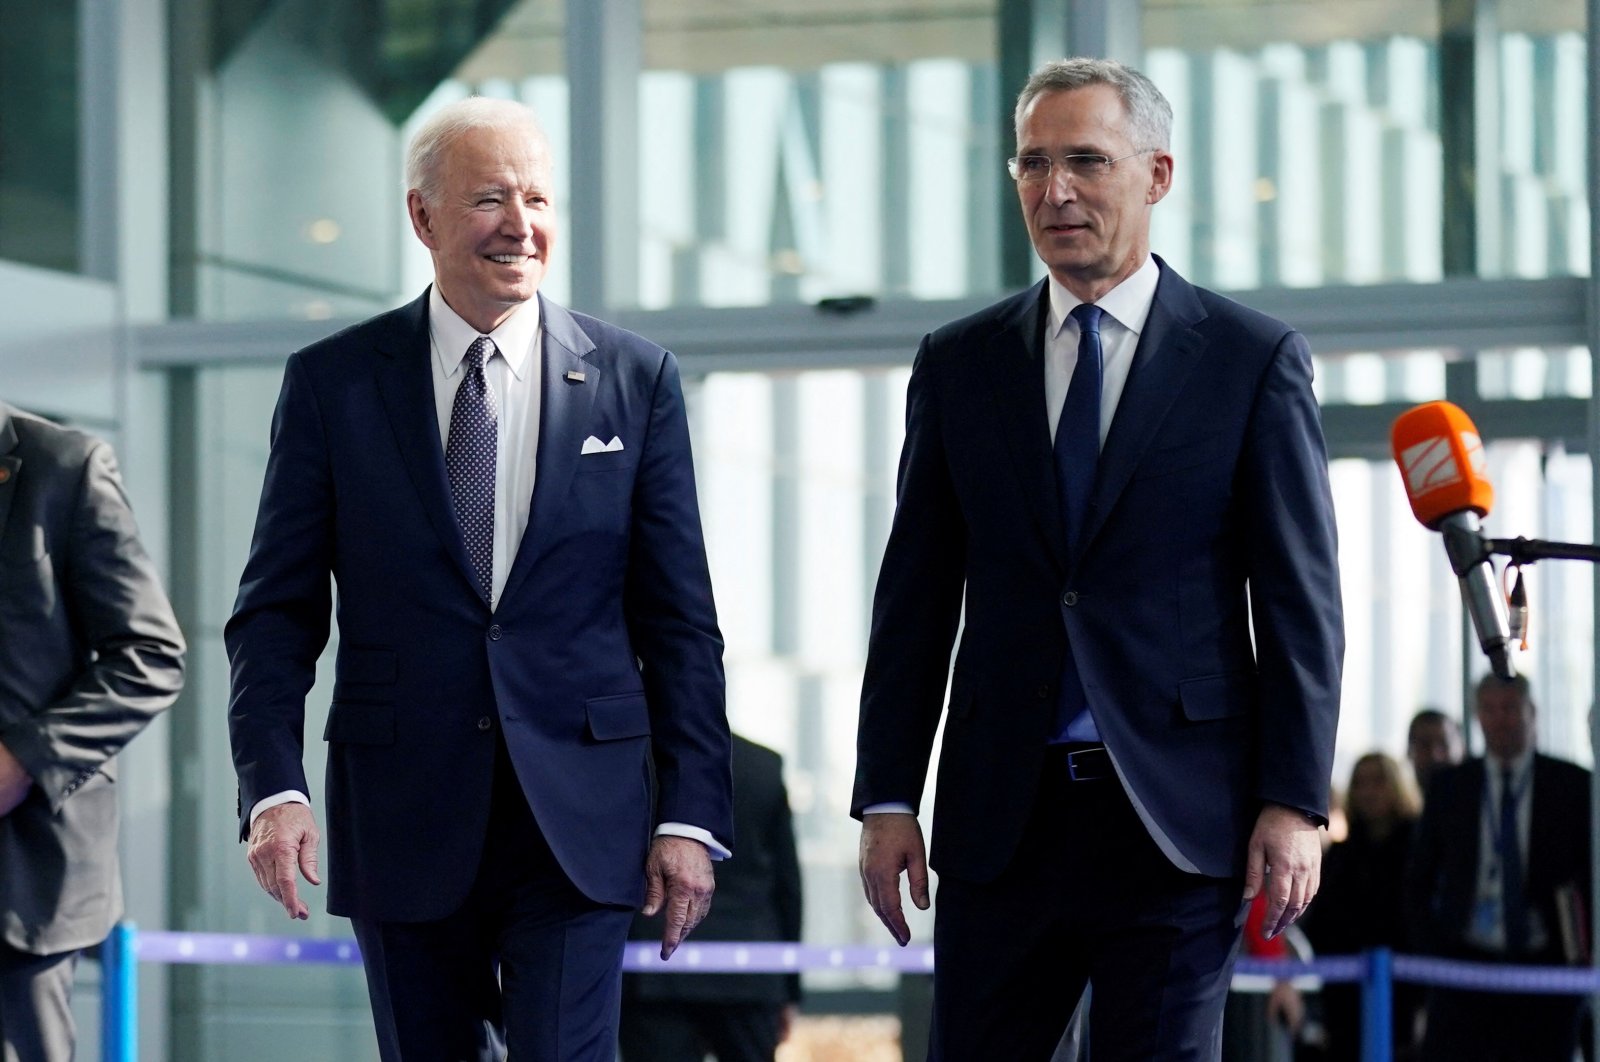 President Joe Biden walks with NATO Secretary-General Jens Stoltenberg as he arrives for meetings with NATO allies about the Russian invasion of Ukraine, in Brussels, Belgium, March 24, 2022. (Reuters Photo)